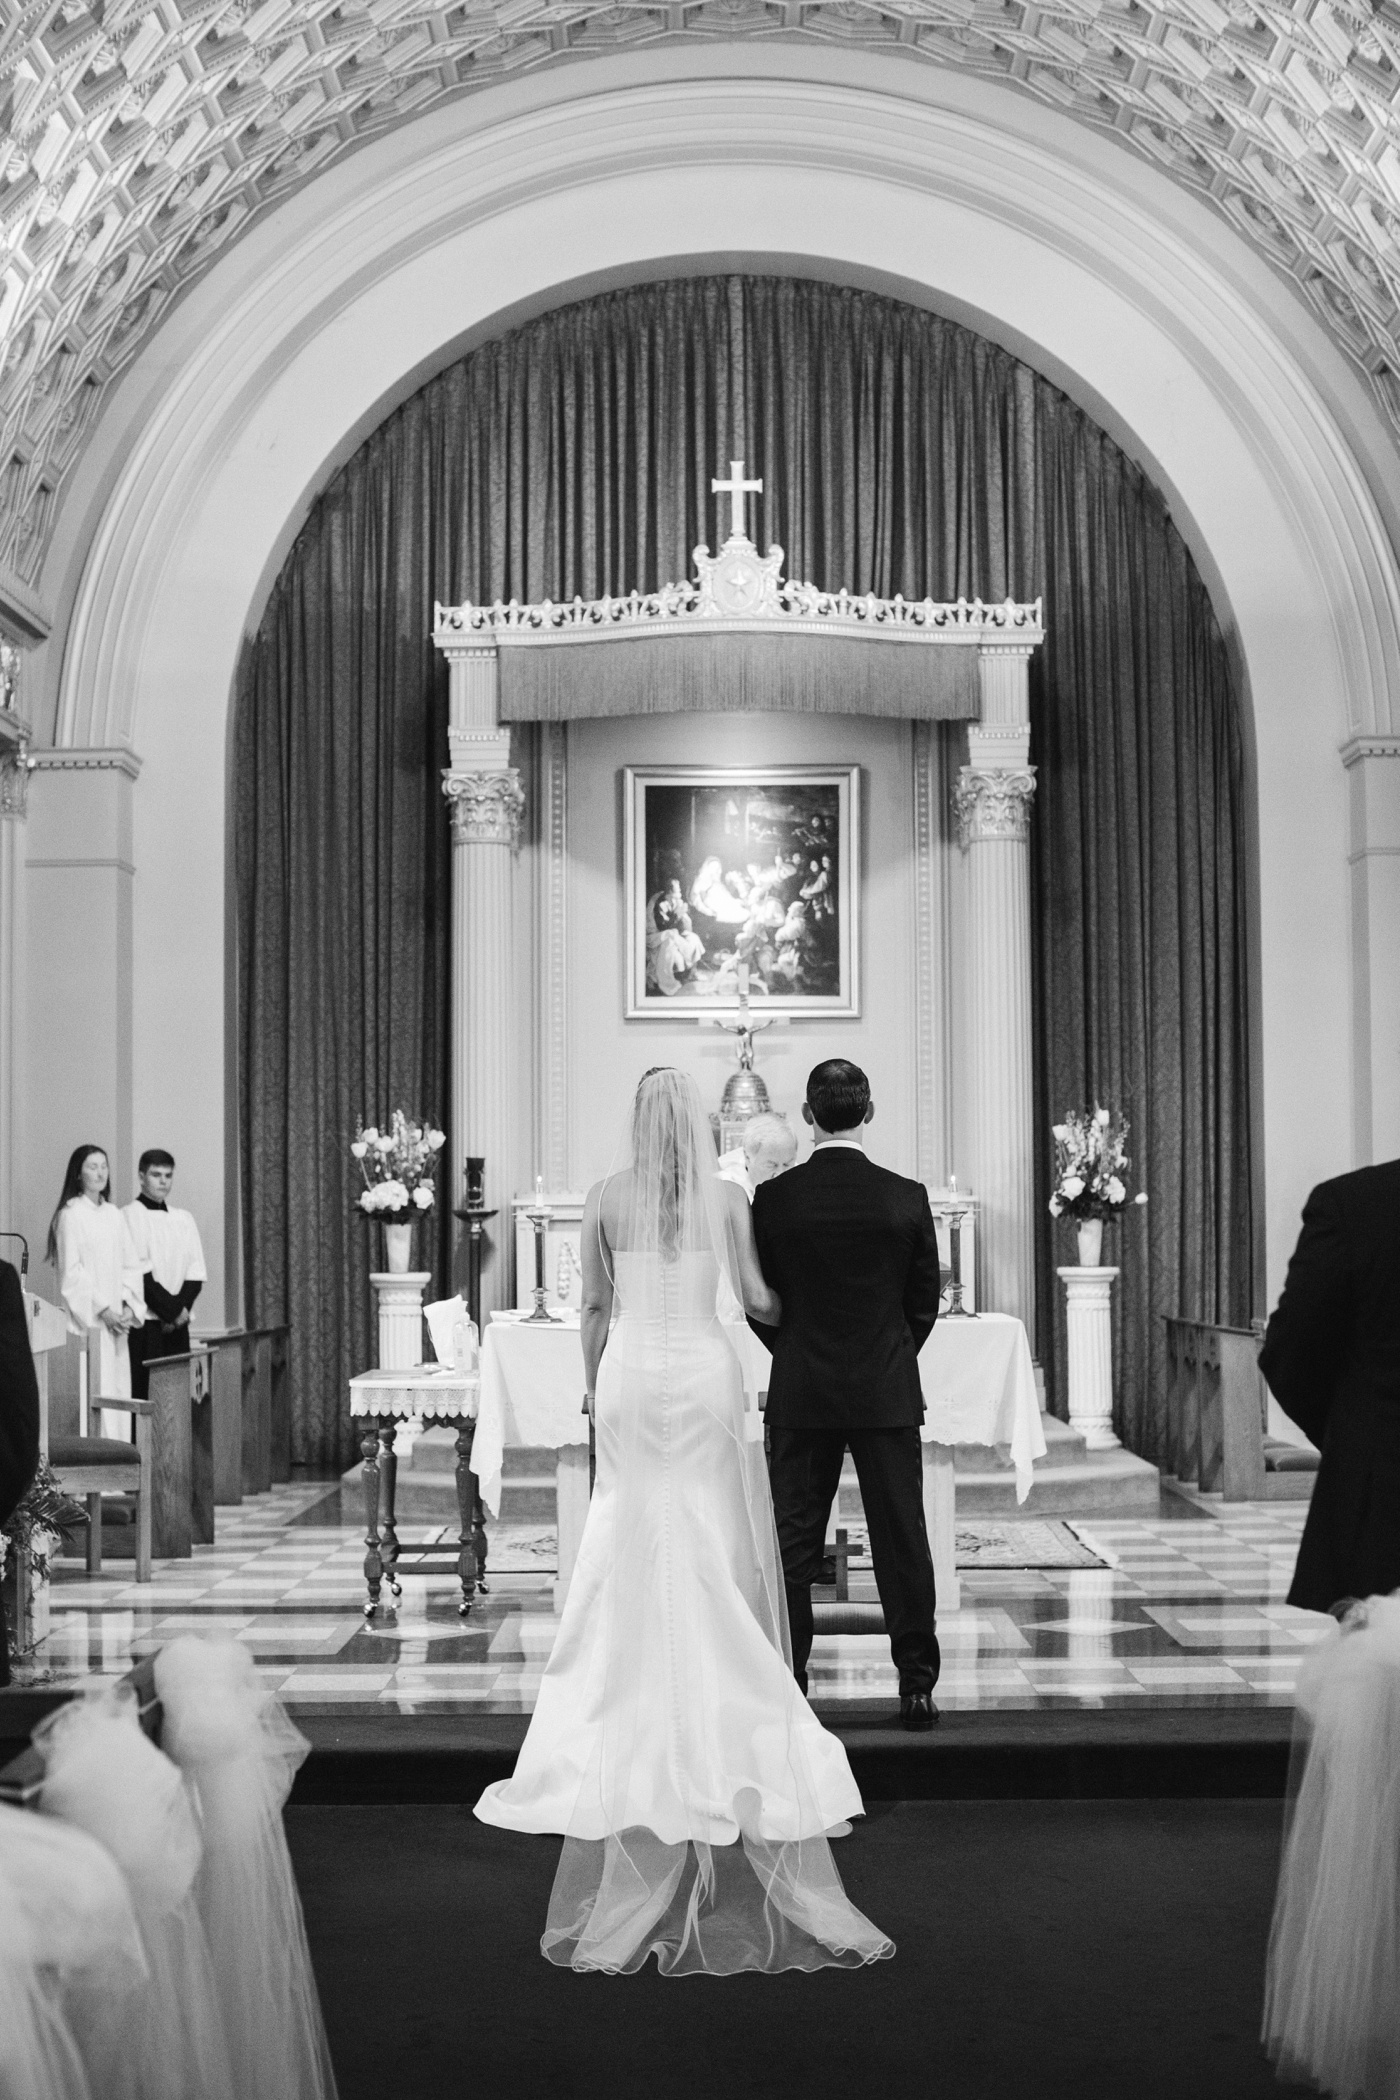 Wedding ceremony at St. Mary of the Nativity Church in Scituate, MA